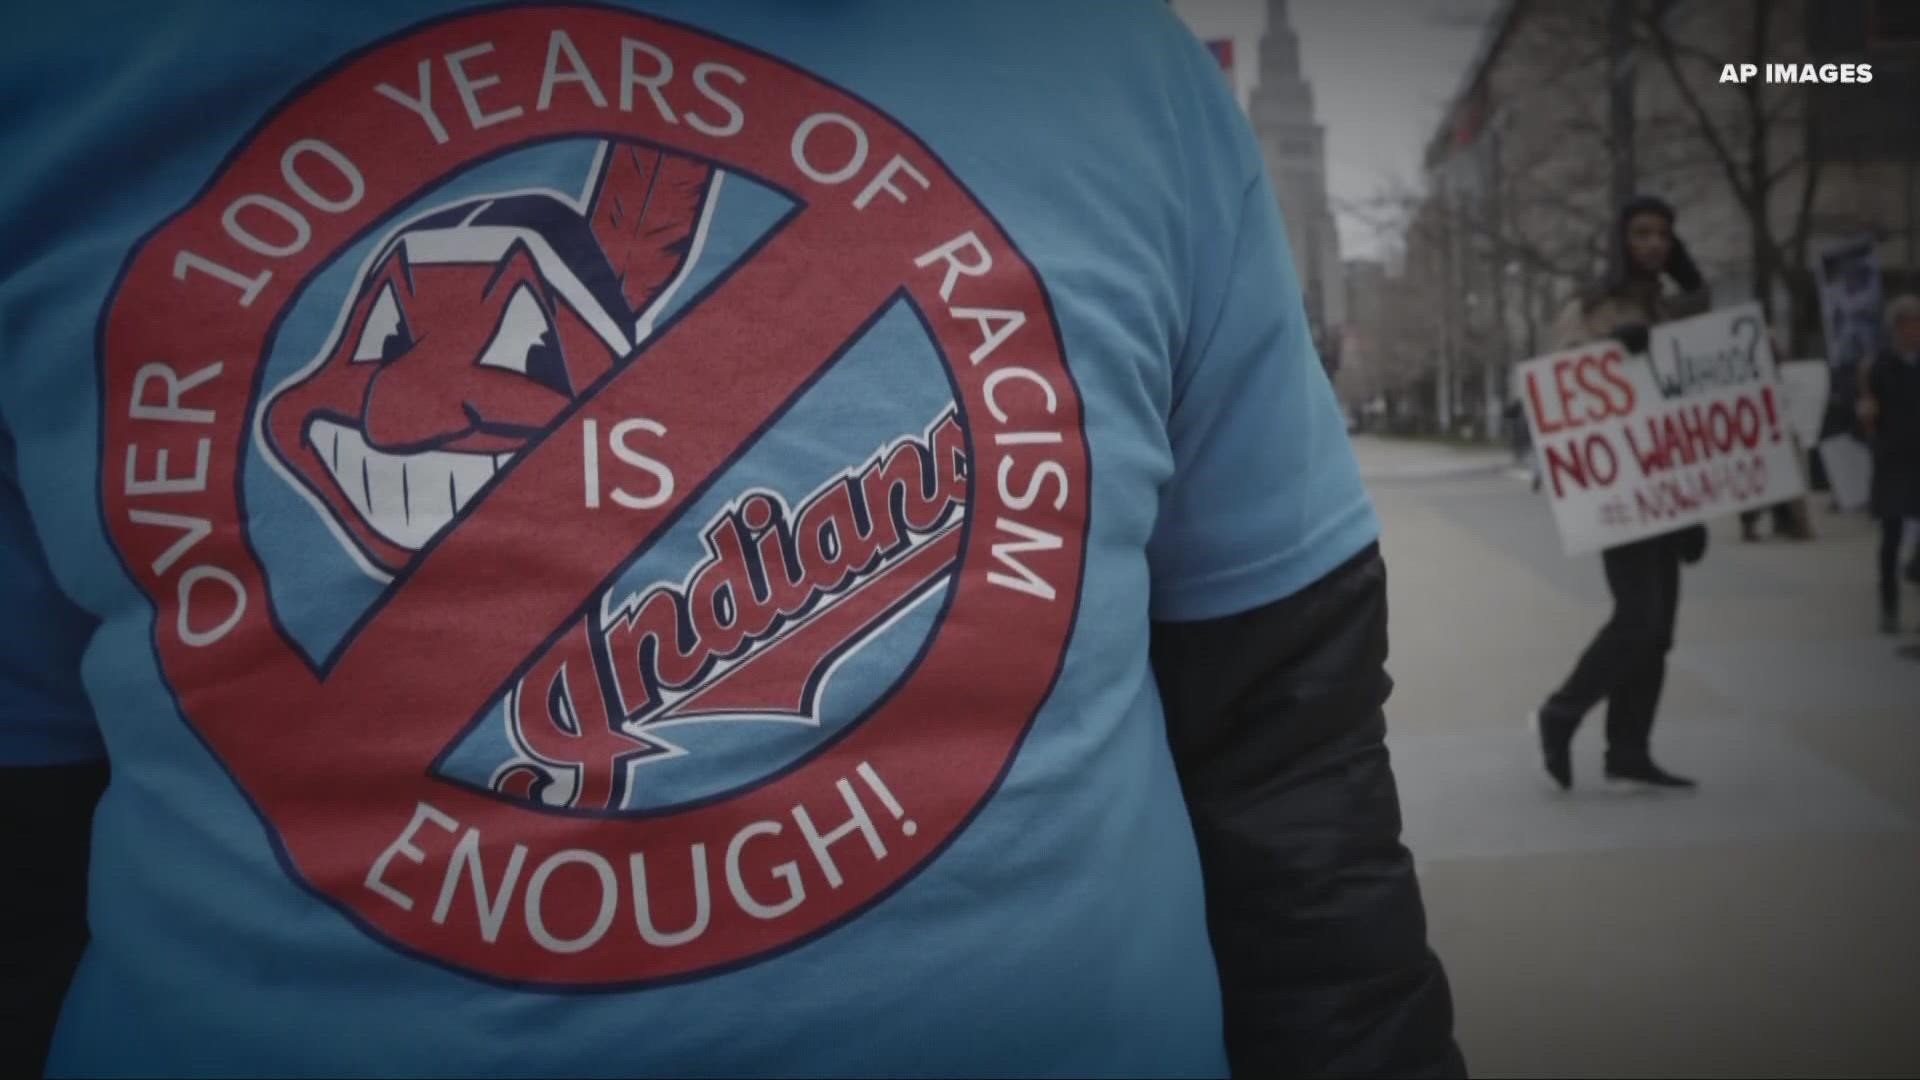 3News' Austin Love has created a documentary that showcases changing the name from Cleveland Indians to Cleveland Guardians.